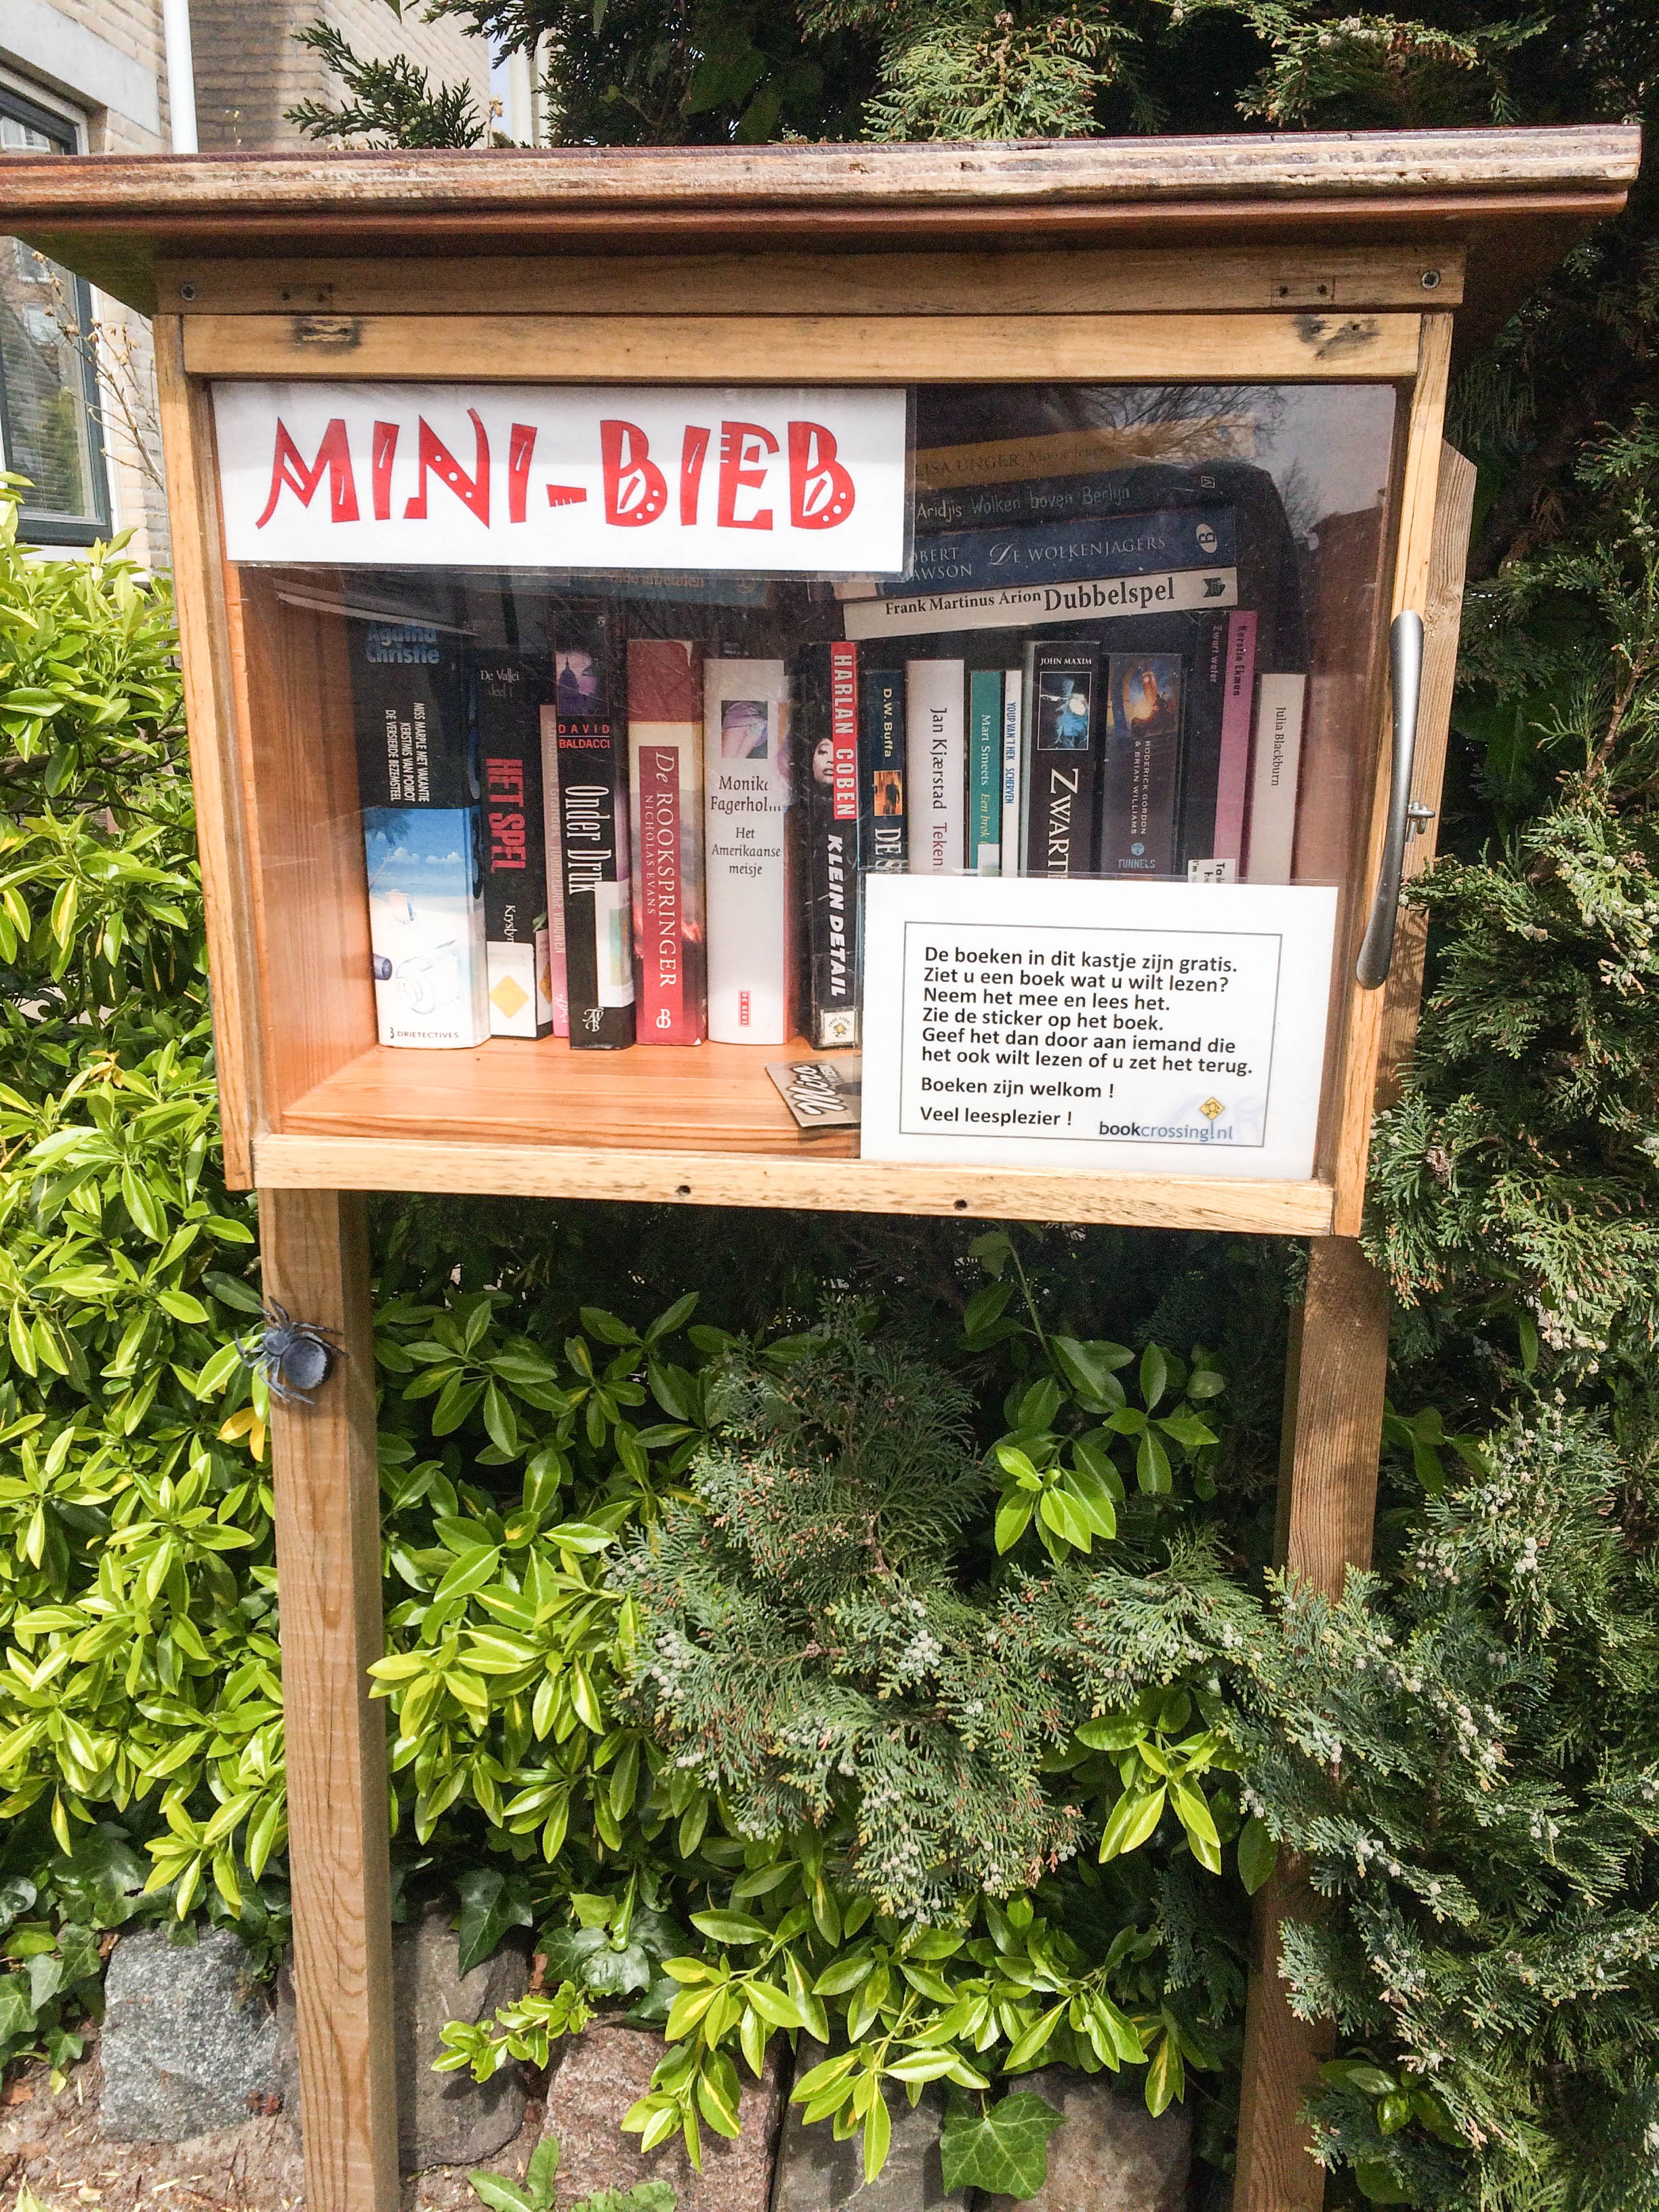 a mini-bieb is a tiny free public library full of books in English and Dutch for neighbors to share and enjoy; these can be found all over in Amsterdam